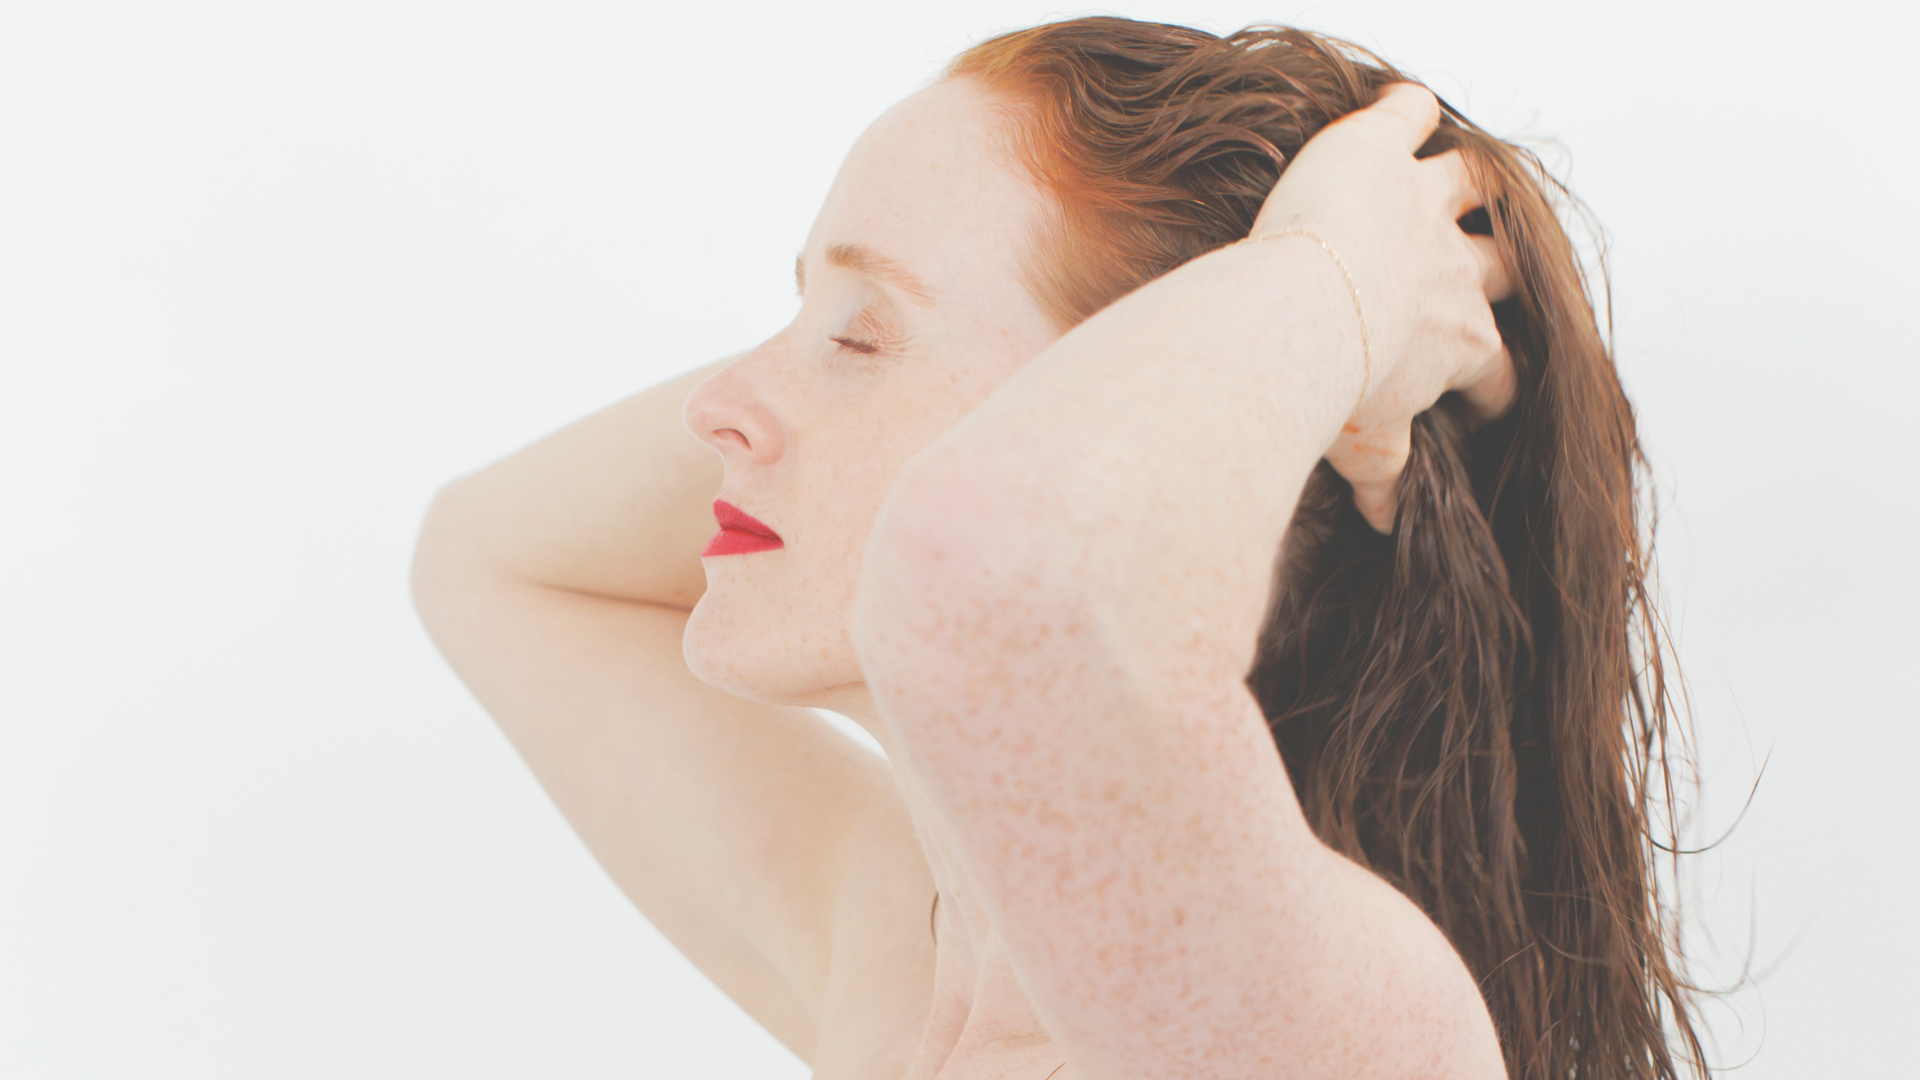 7 Redhead-Approved Products We Use In Our Showers